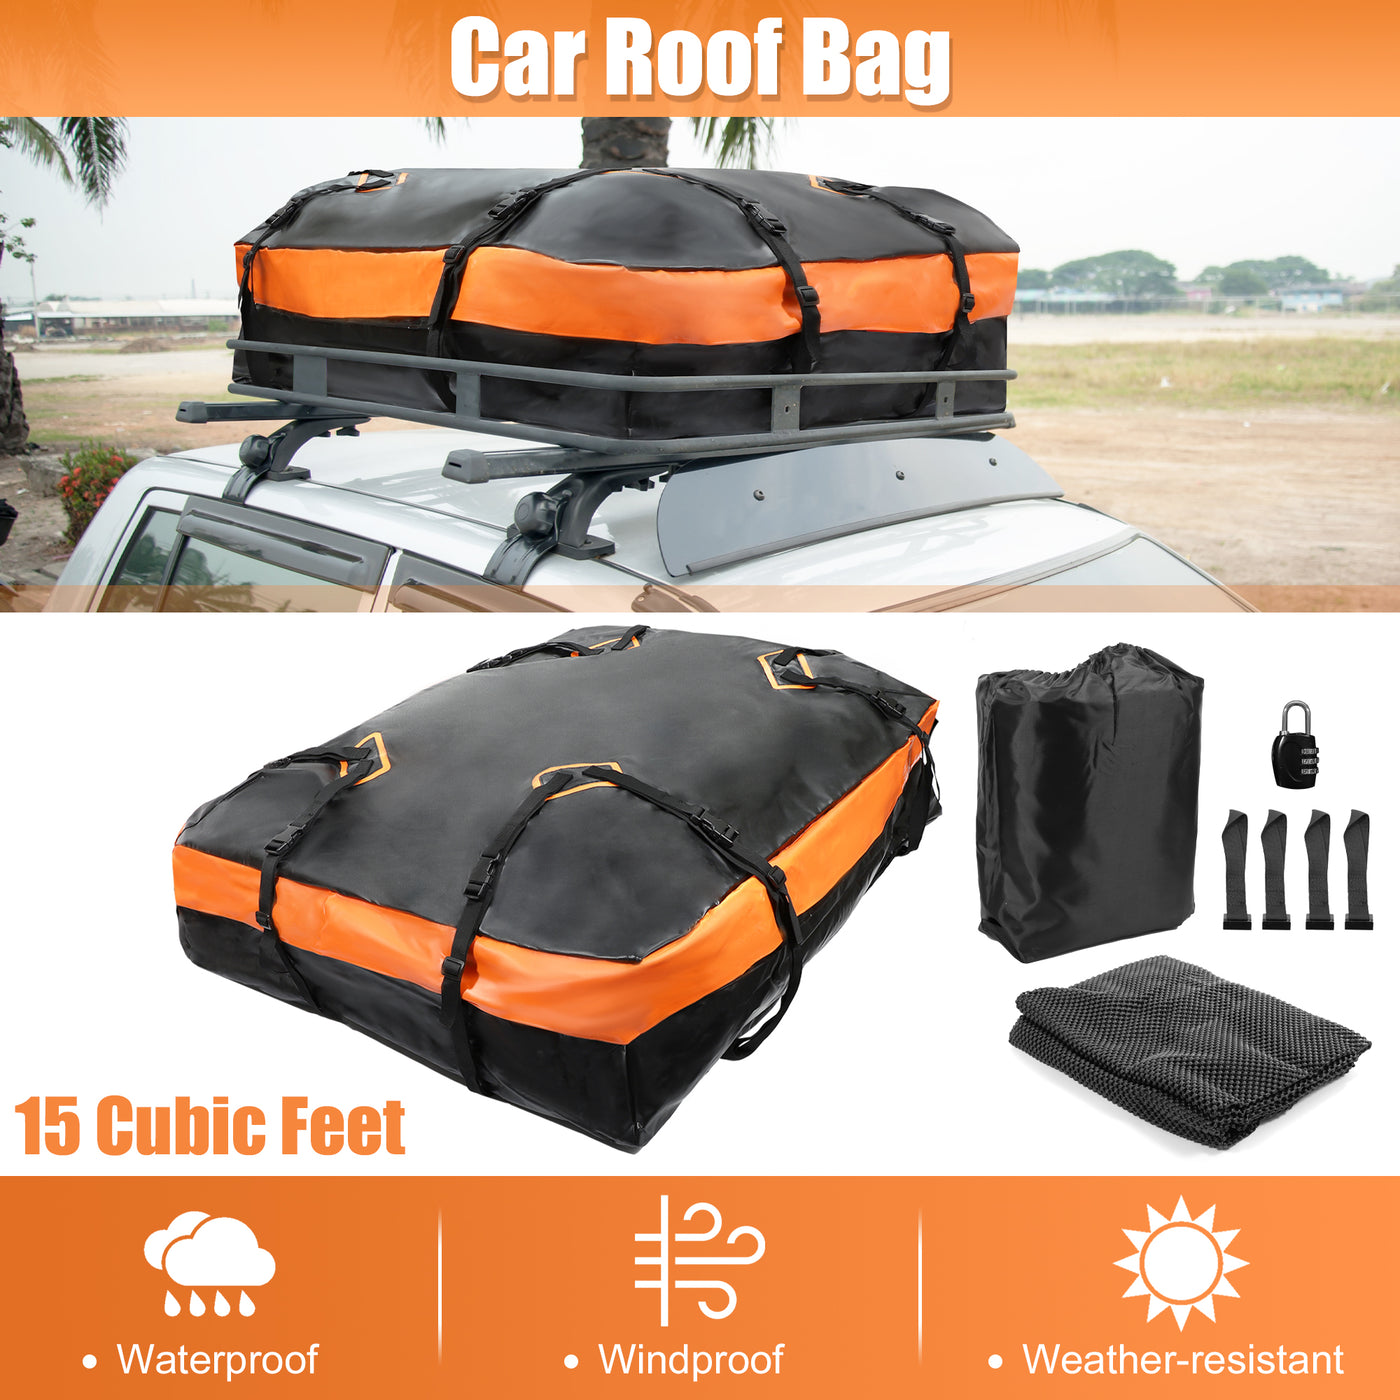 X AUTOHAUX 15 Cubic Feet Car Roof Bag Rooftop Cargo Carrier Bag Waterproof Luggage Carriers for Cars with or without Rack Anti-Slip Mat 4 Door Hooks Set